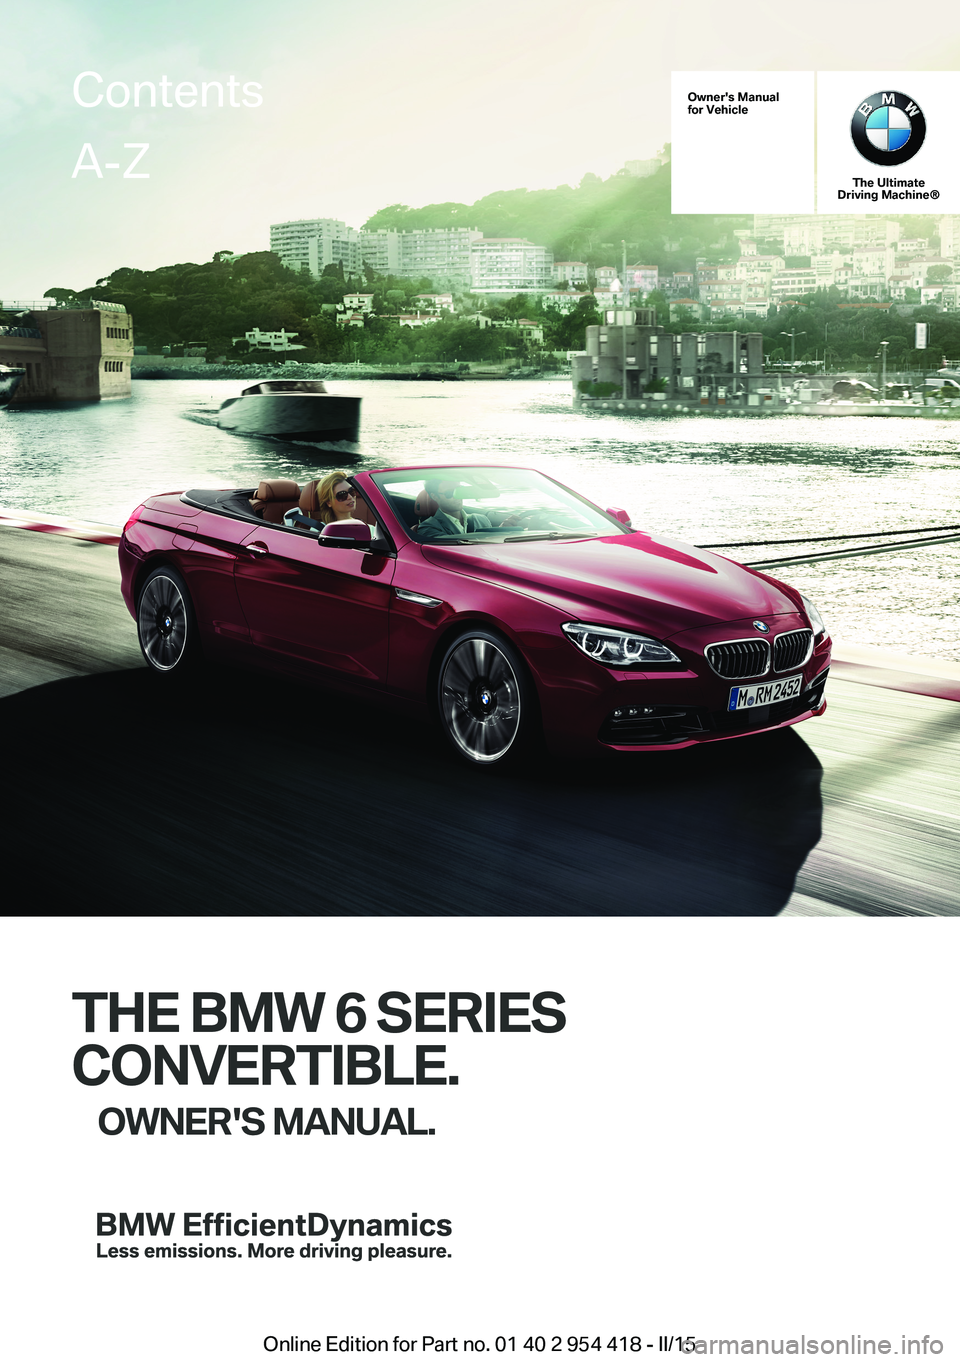 BMW 640I CONVERTIBLE 2015  Owners Manual Owner's Manualfor Vehicle
The UltimateDriving Machine®
THE BMW 6 SERIES
CONVERTIBLE.
OWNER'S MANUAL.
ContentsA-Z
Online Edition for Part no. 01 40 2 954 418 - II/15   